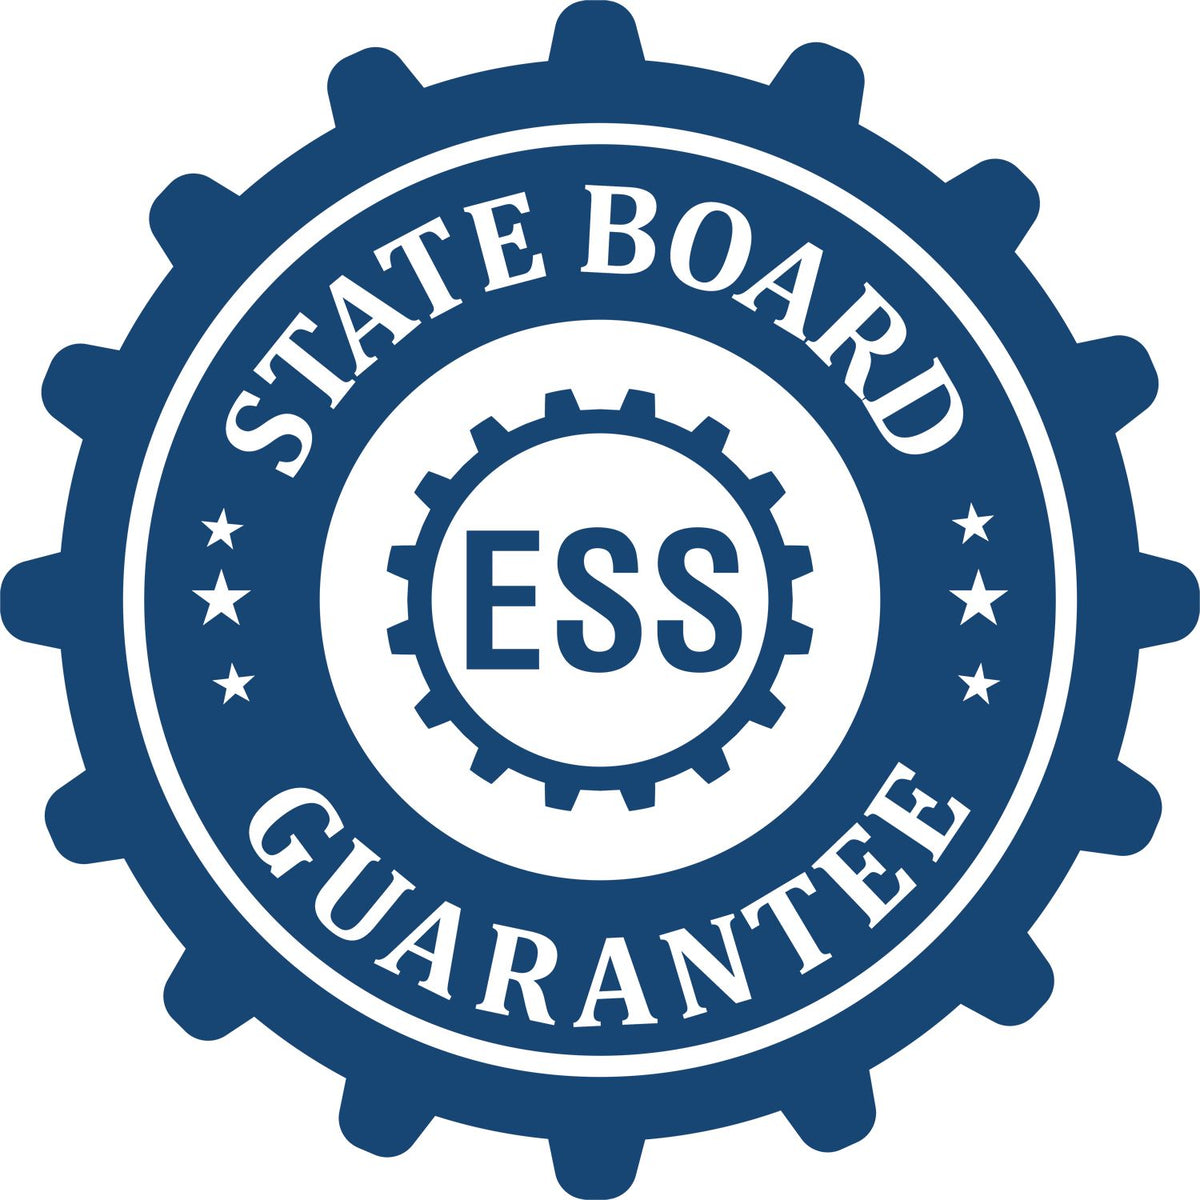 An emblem in a gear shape illustrating a state board guarantee for the Handheld Mississippi Land Surveyor Seal product.